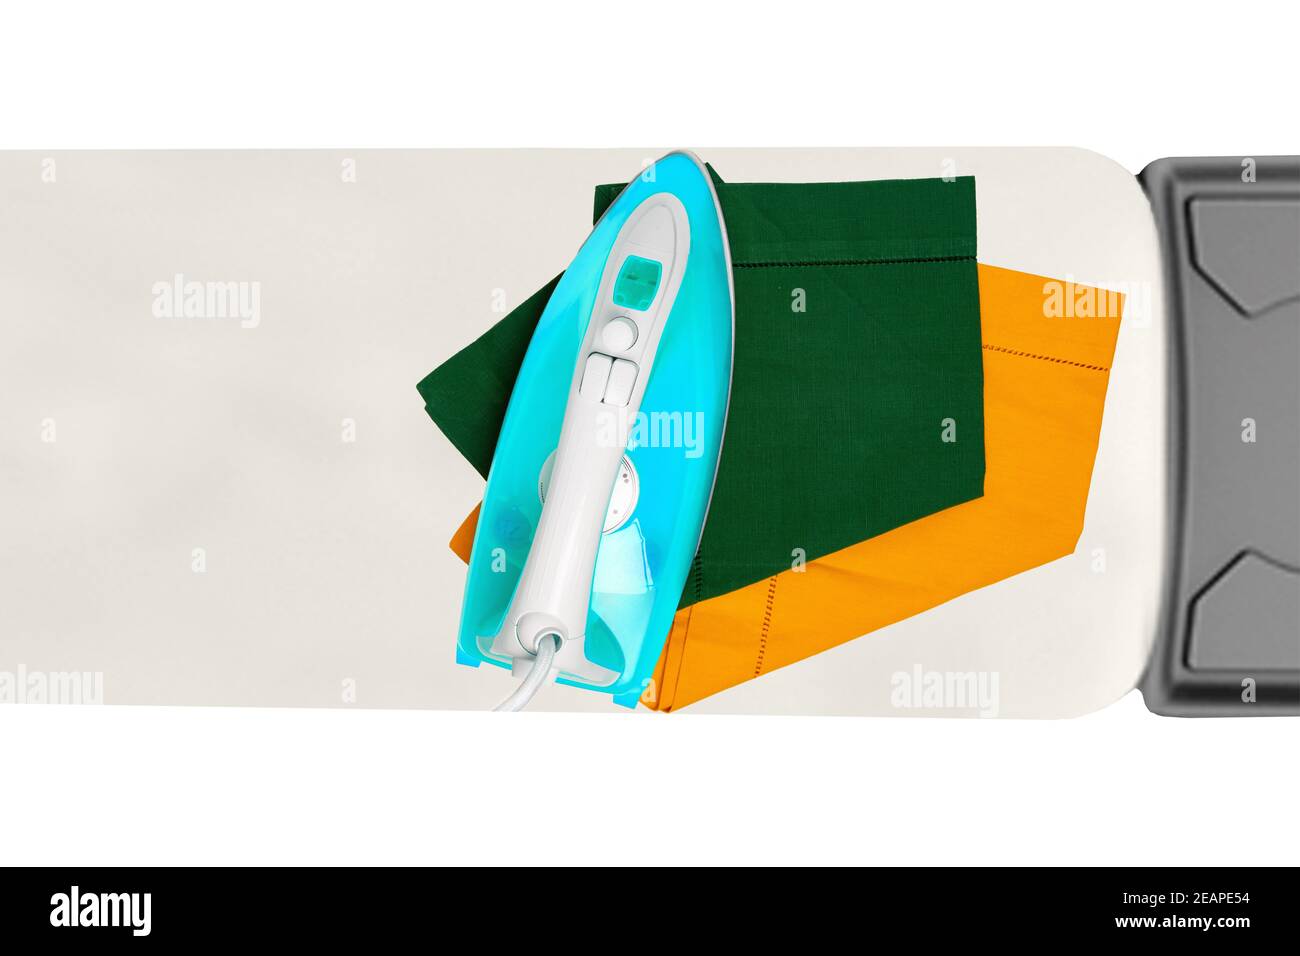 Top view of a modern electric blue iron ironing a green and a yellow cloth napkin on an ironing board indoors isolated. Advertising for the laundry service with space. Stock Photo